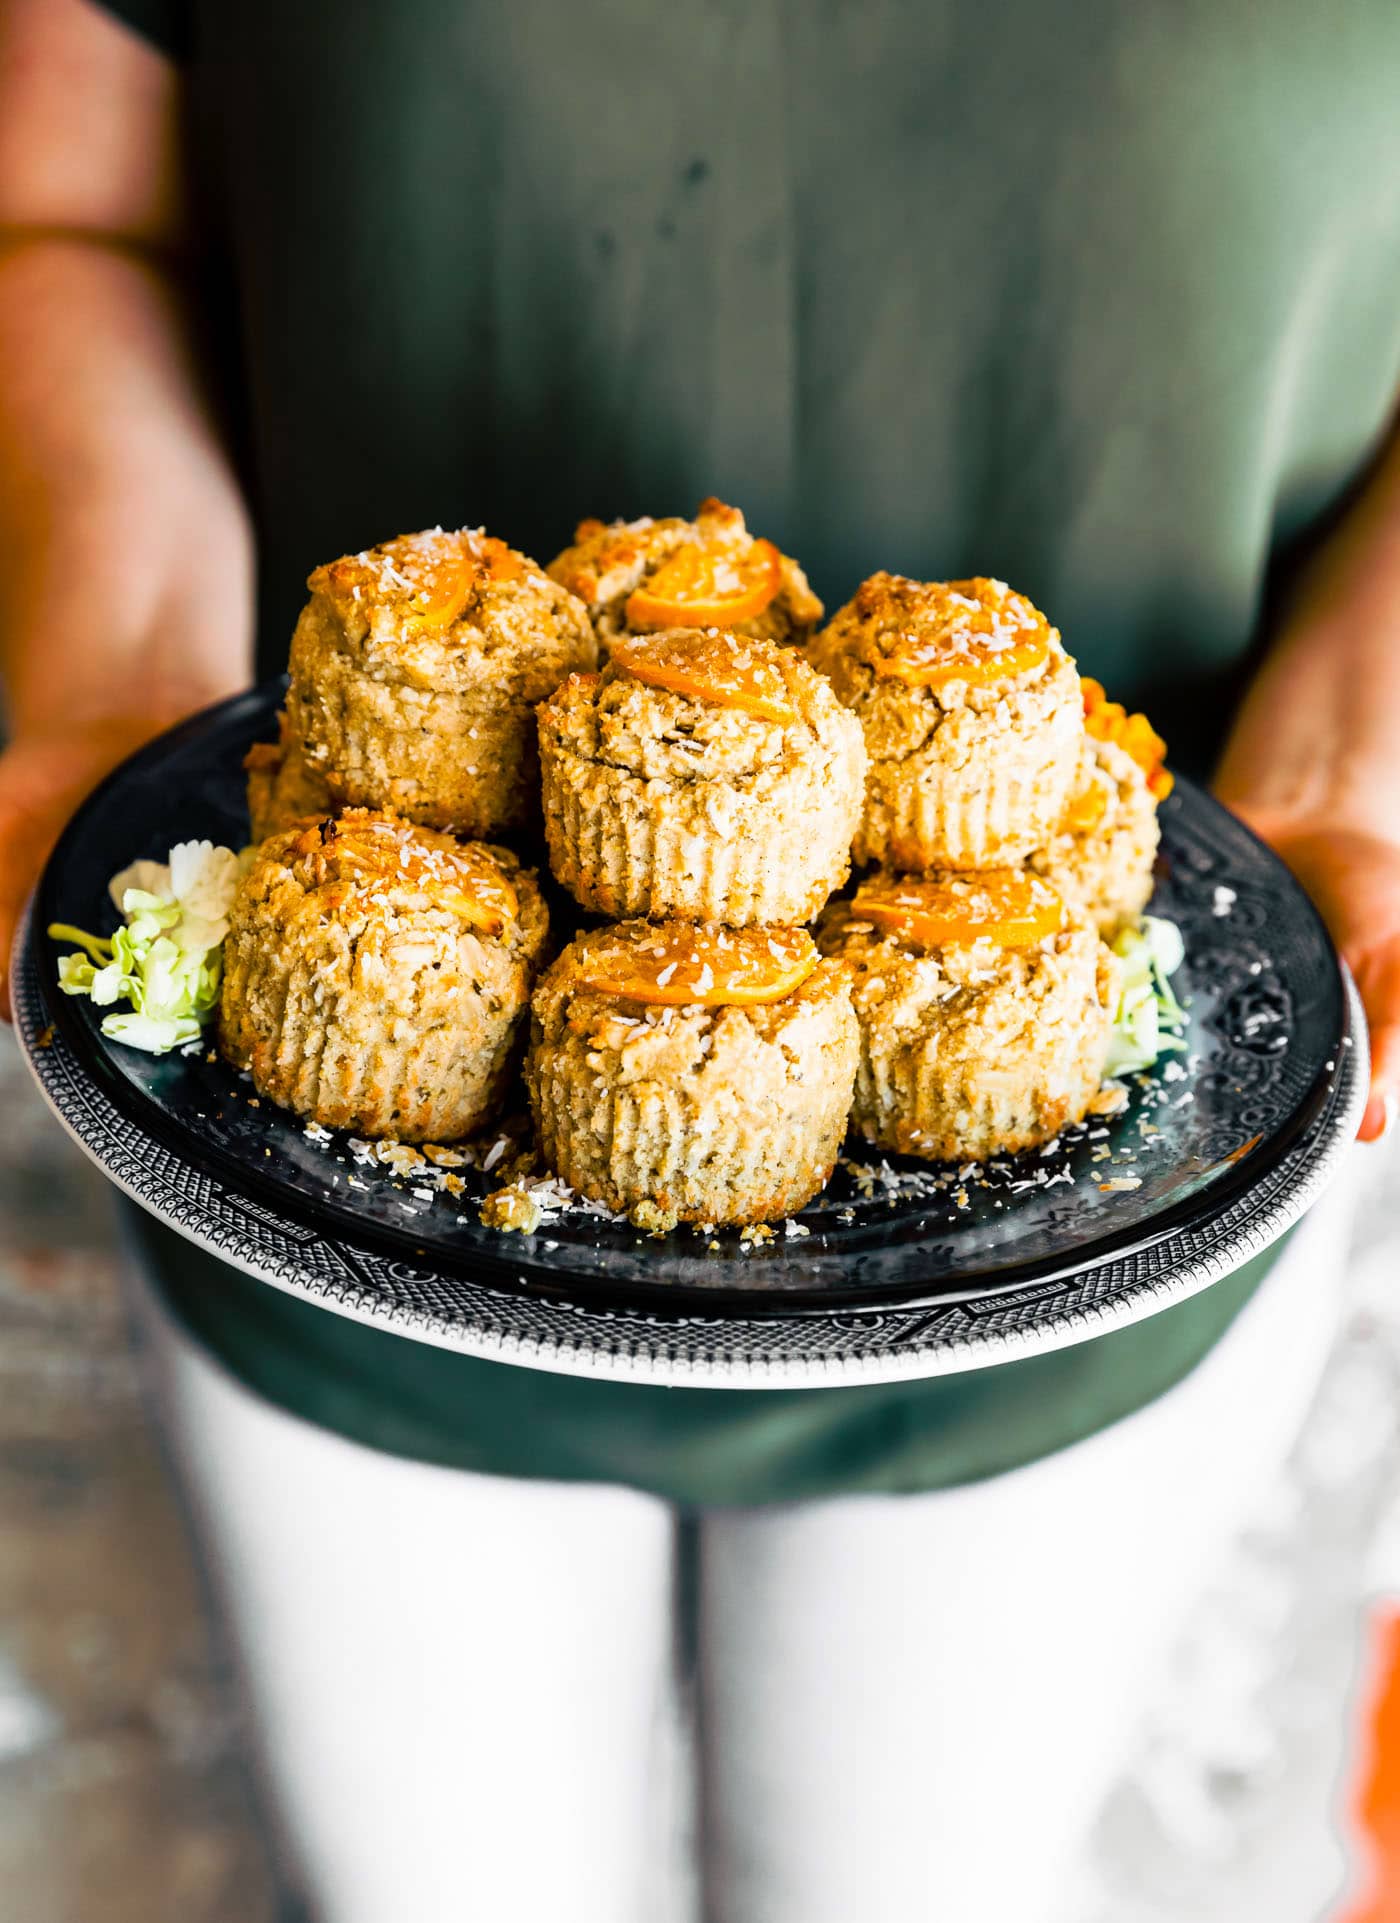 Orange oat muffins stacked up on a black tray being held by a woman wearing green.